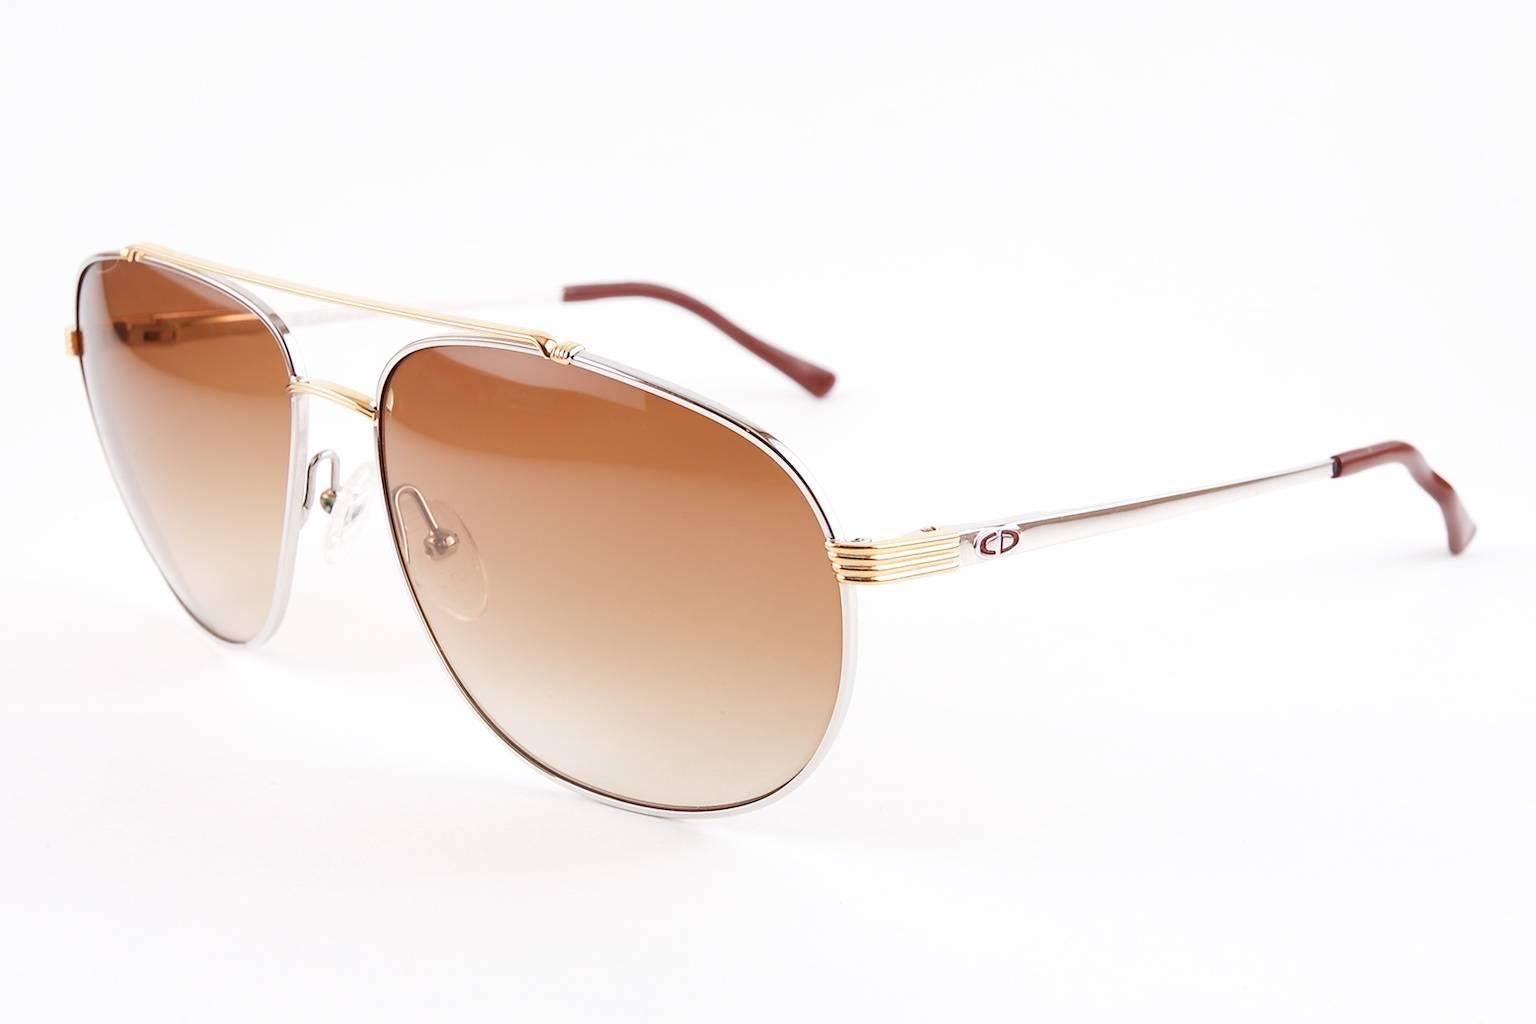 Vintage Christian Dior 2753 
- Made in Austria.
- Measurements: 61-15-140

Best known for their sleek frames, Vintage Christian Dior sunglasses and frames continue to be one of the most stylish and desirable glasses in the world today.  When